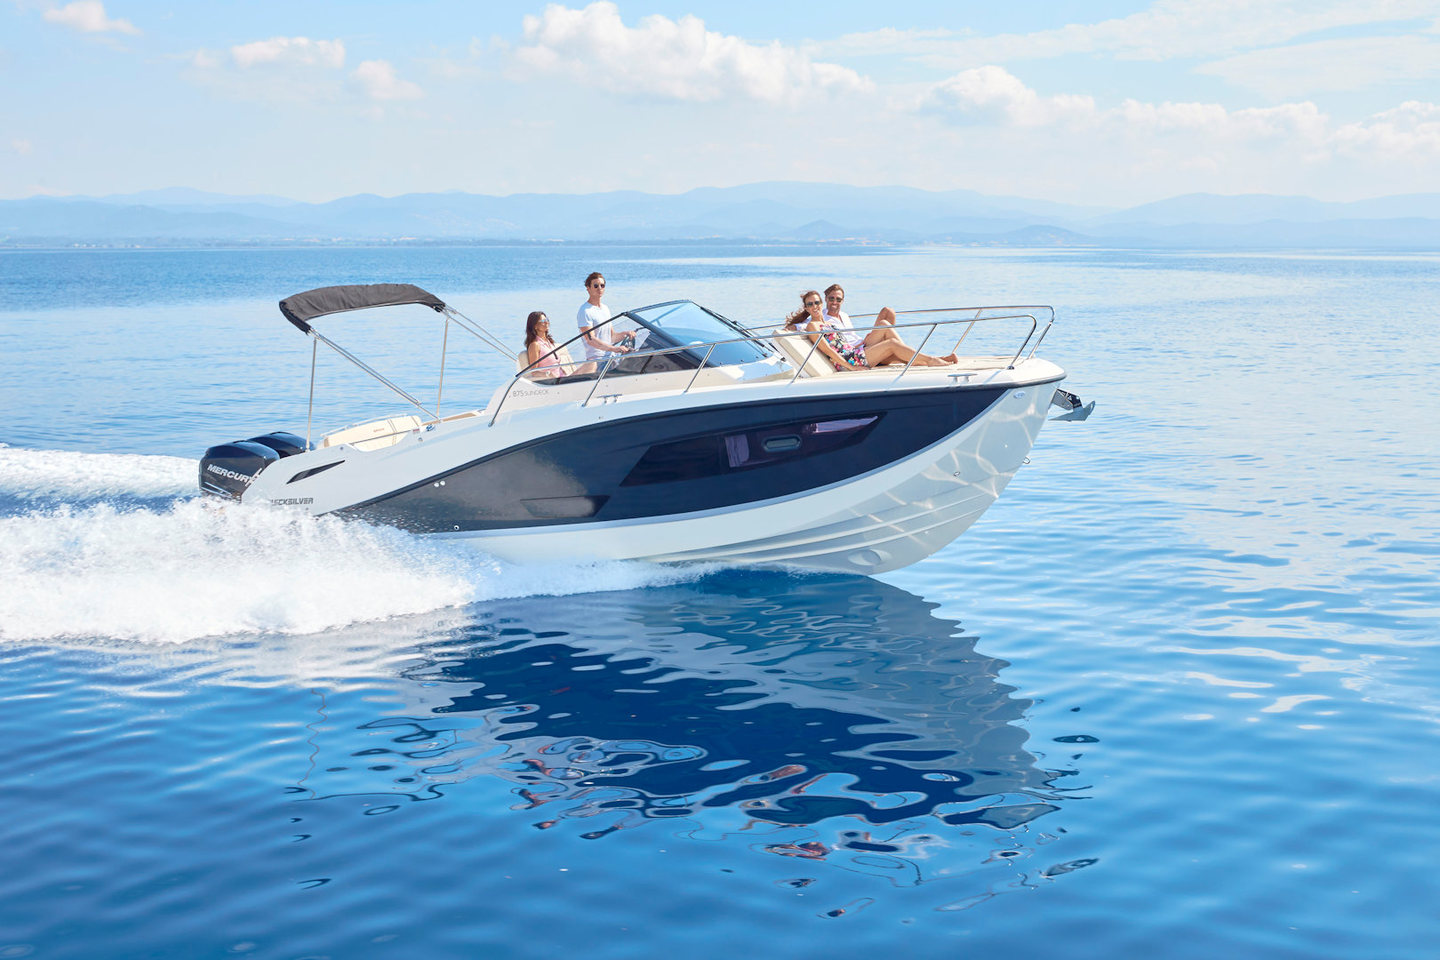 360 VR Virtual Tours of the Quicksilver Activ 875 Sundeck